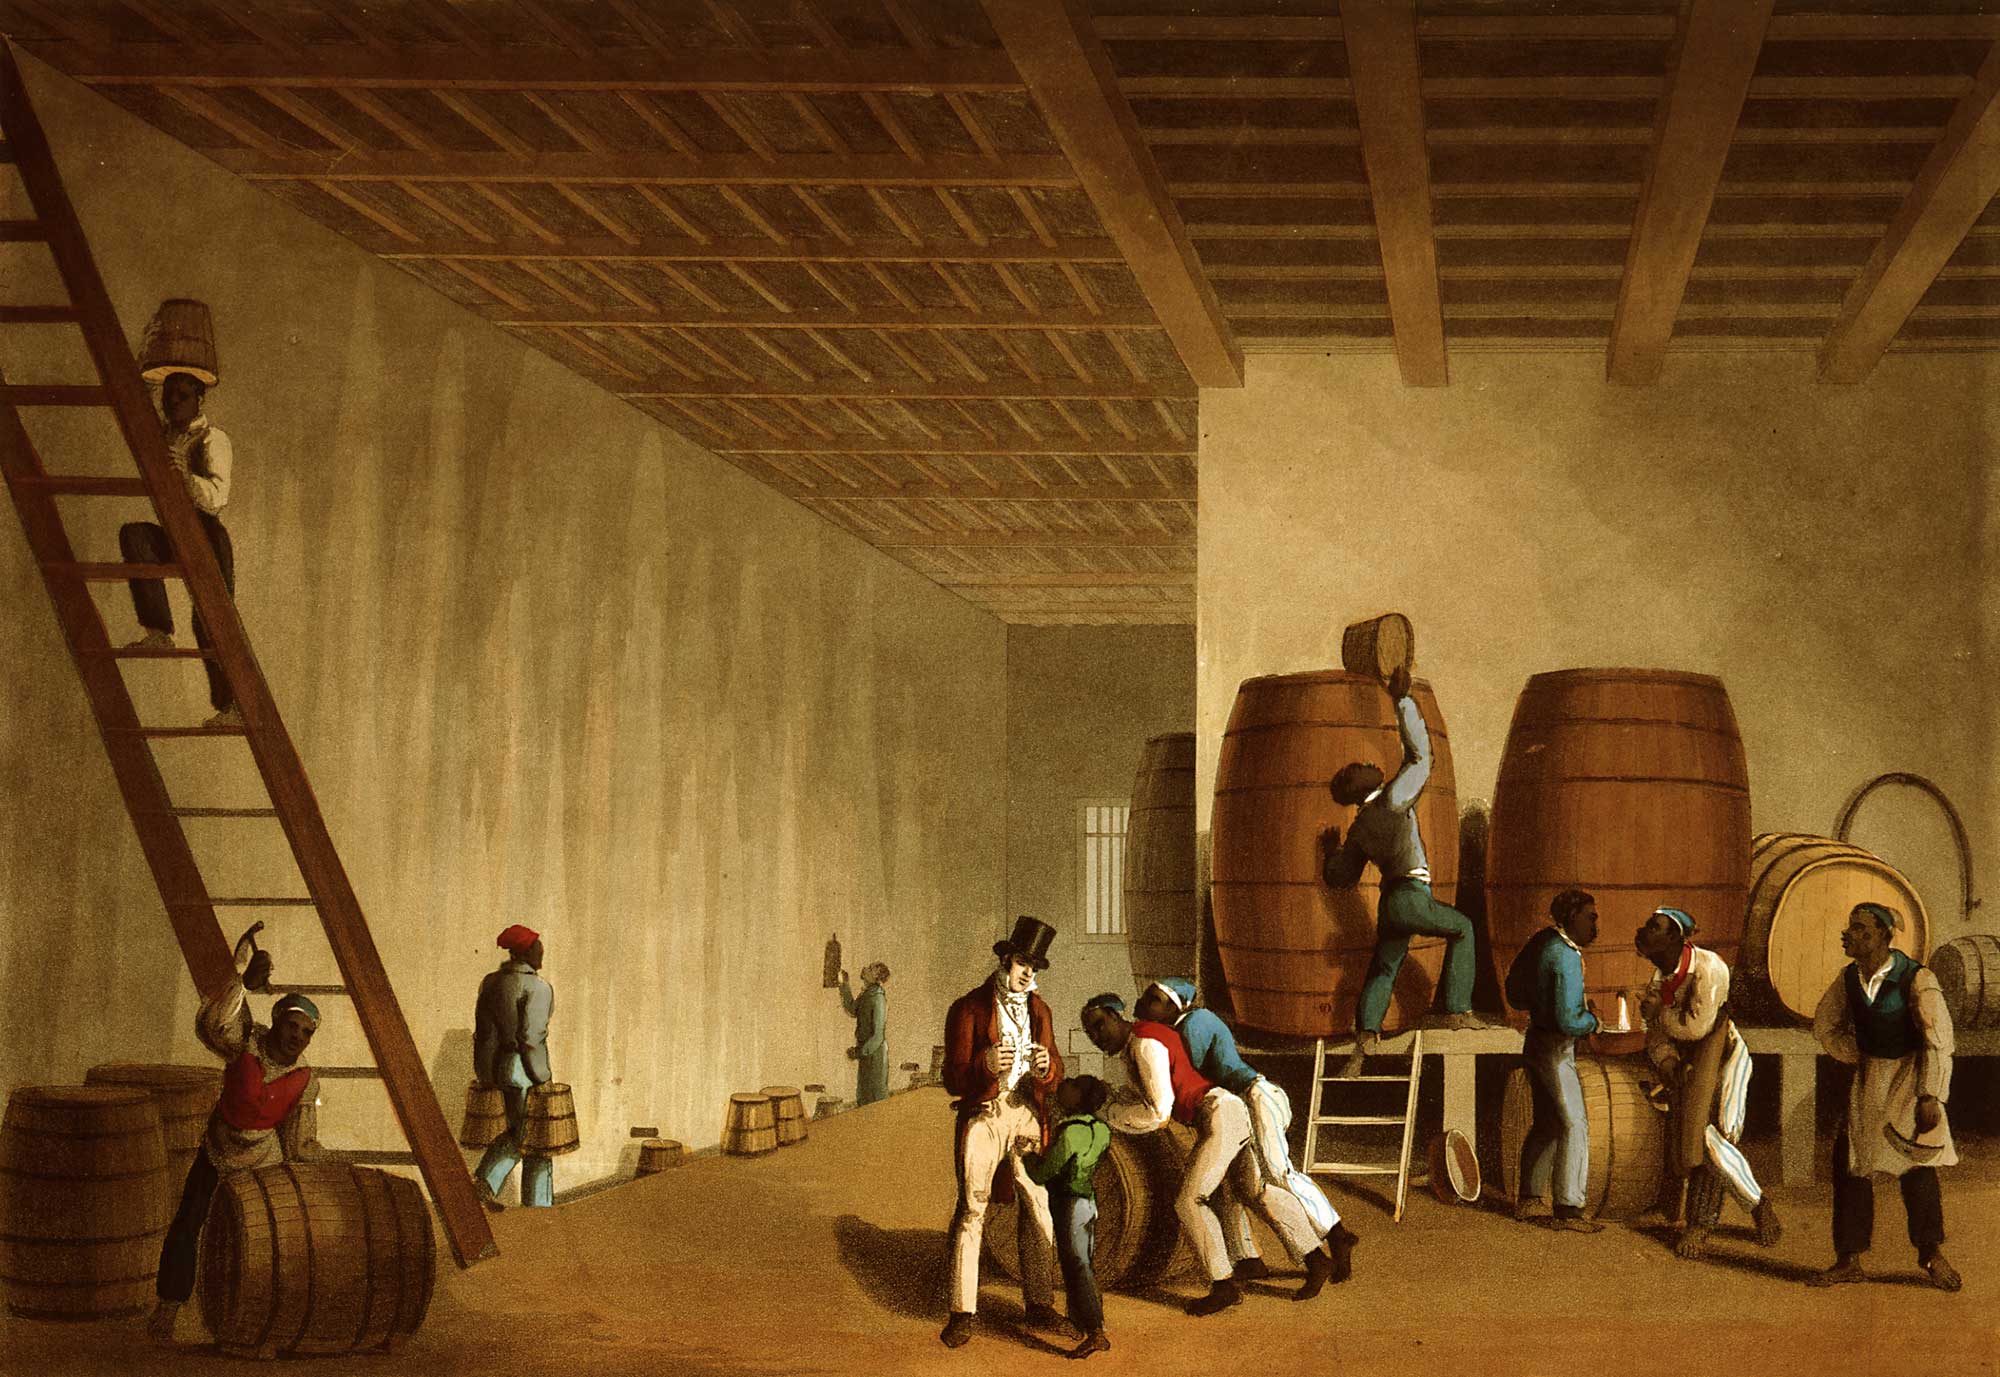 Illustration of rum production in the Caribbean in the early 1800s. The image shows a large room with wooden barrels being filled with rum by enslaved people. In the lower left corner, an enslaved man makes a wood barrel. A white overseer stands in the center of the image with an enslaved child standing in front of him.